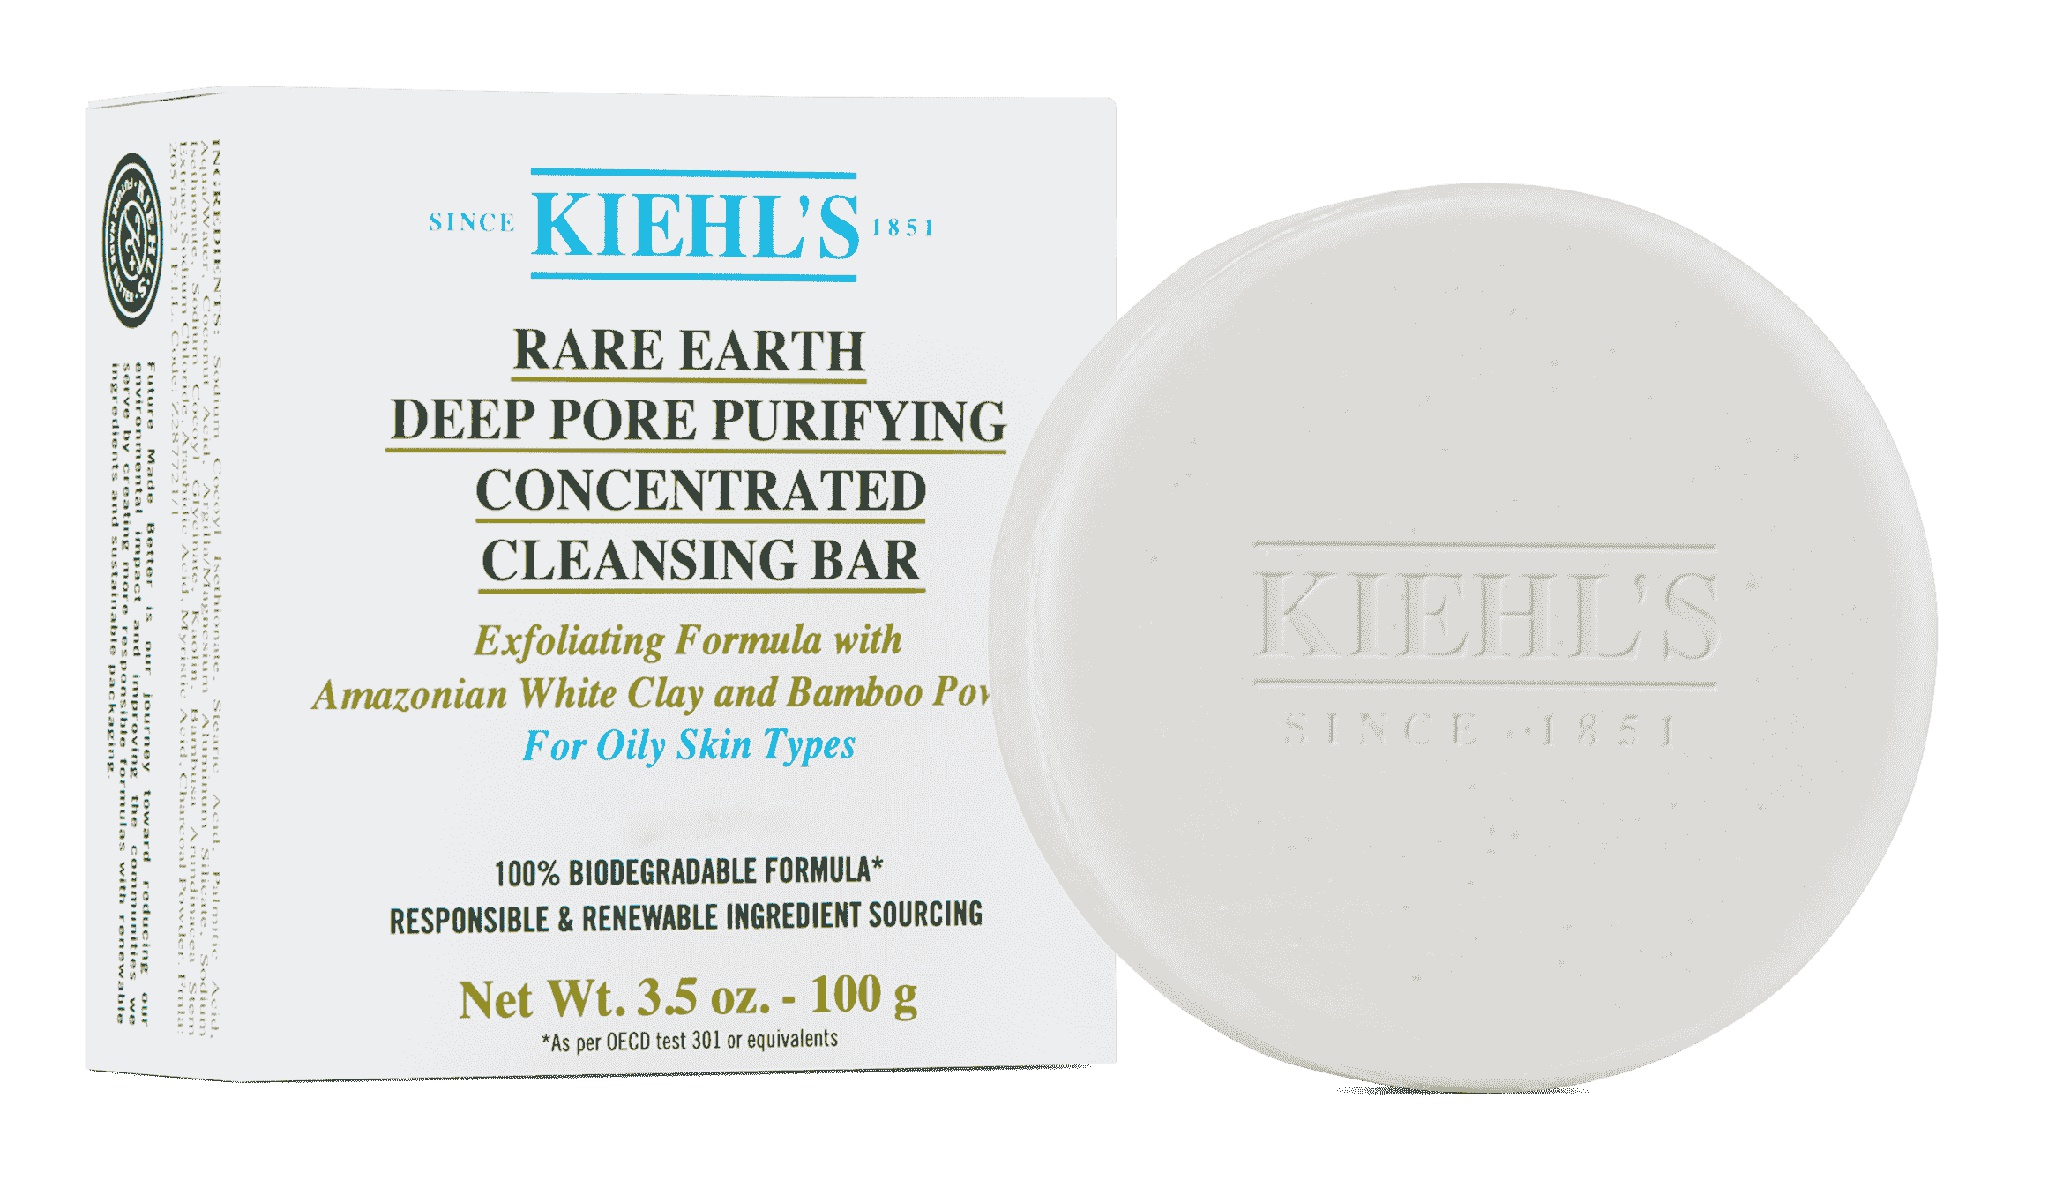 Kiehl’s Rare Earth Deep Pore Purifying Concentrated Cleansing Bar